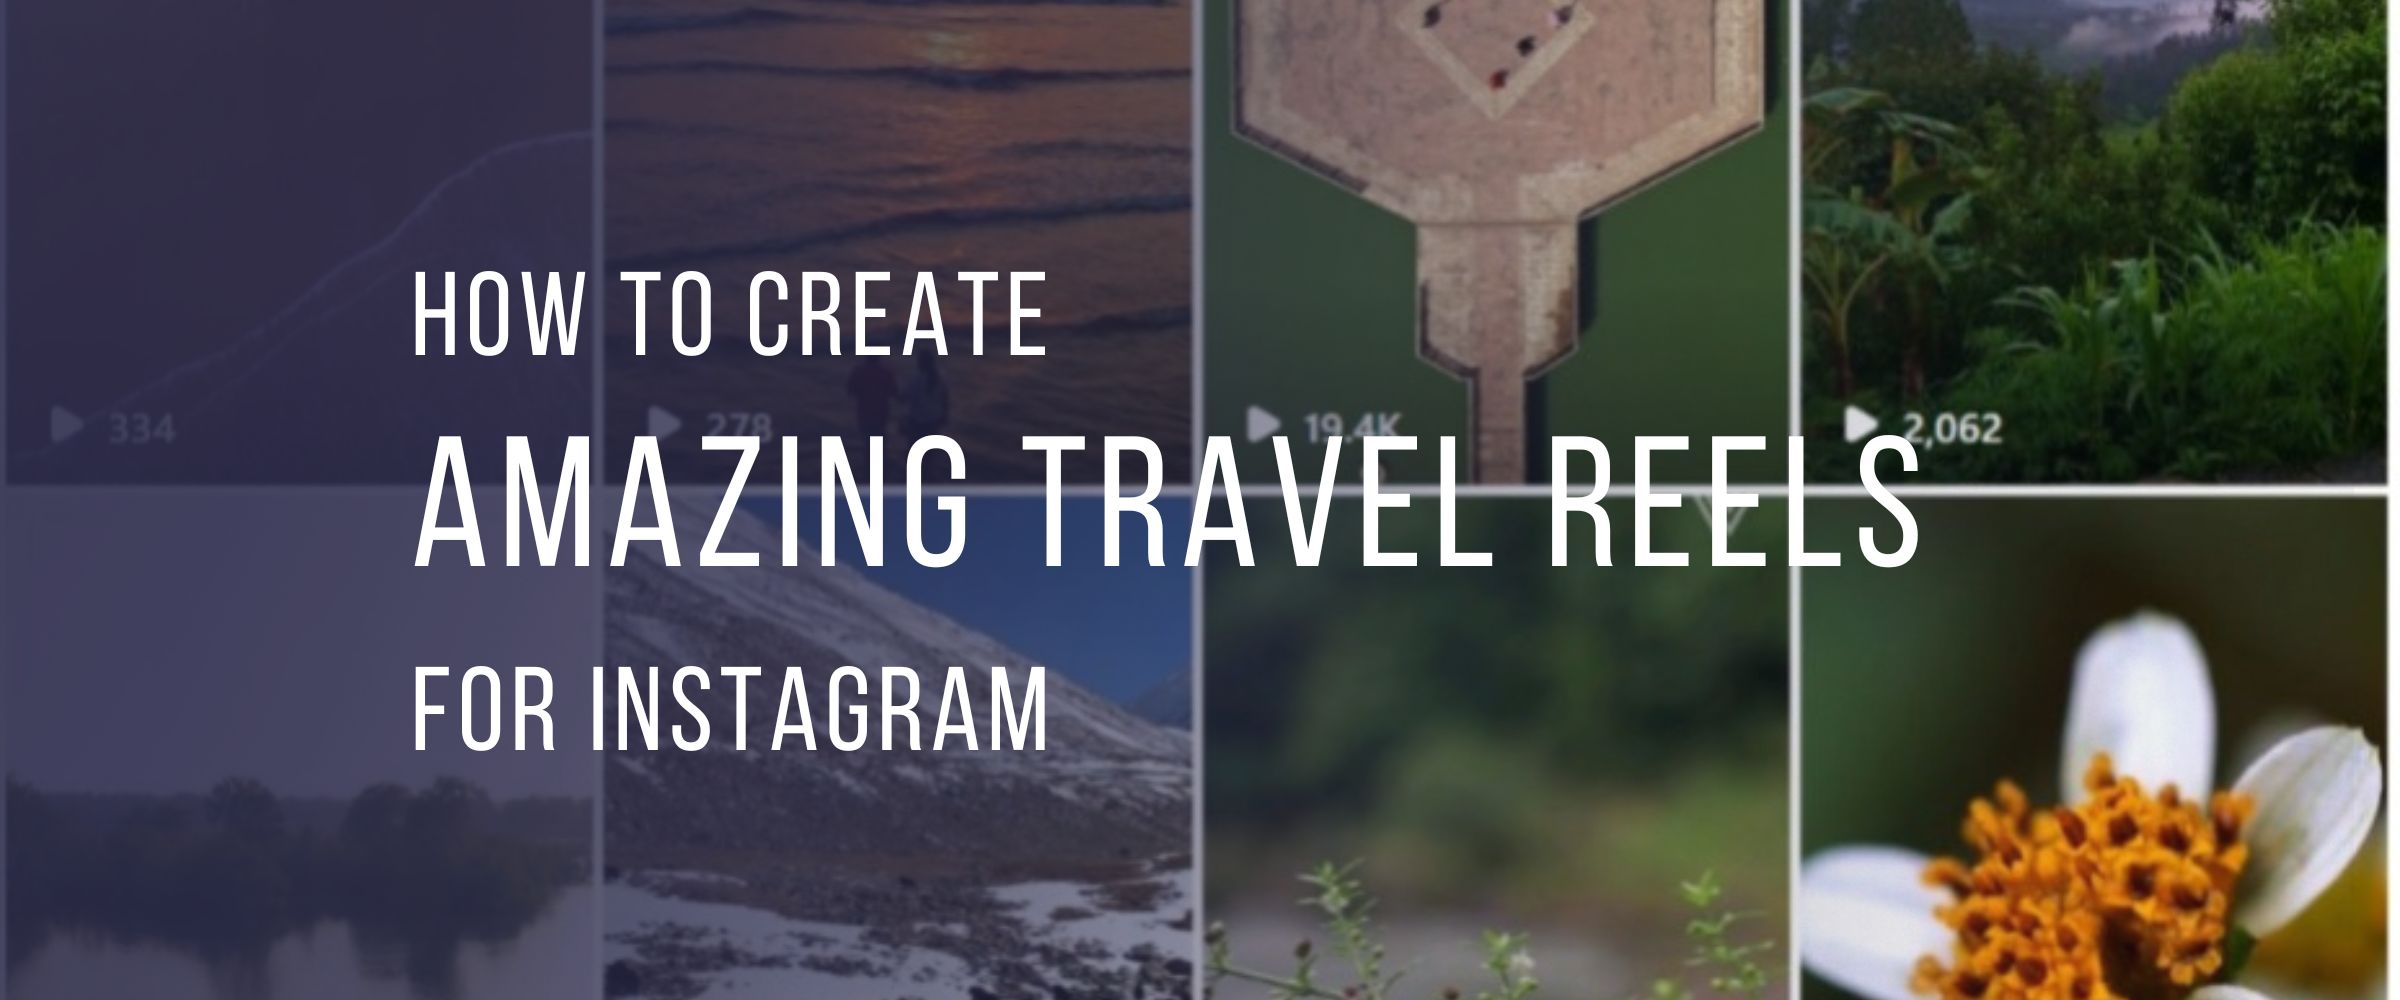 How to Create Amazing Travel Reels for Instagram